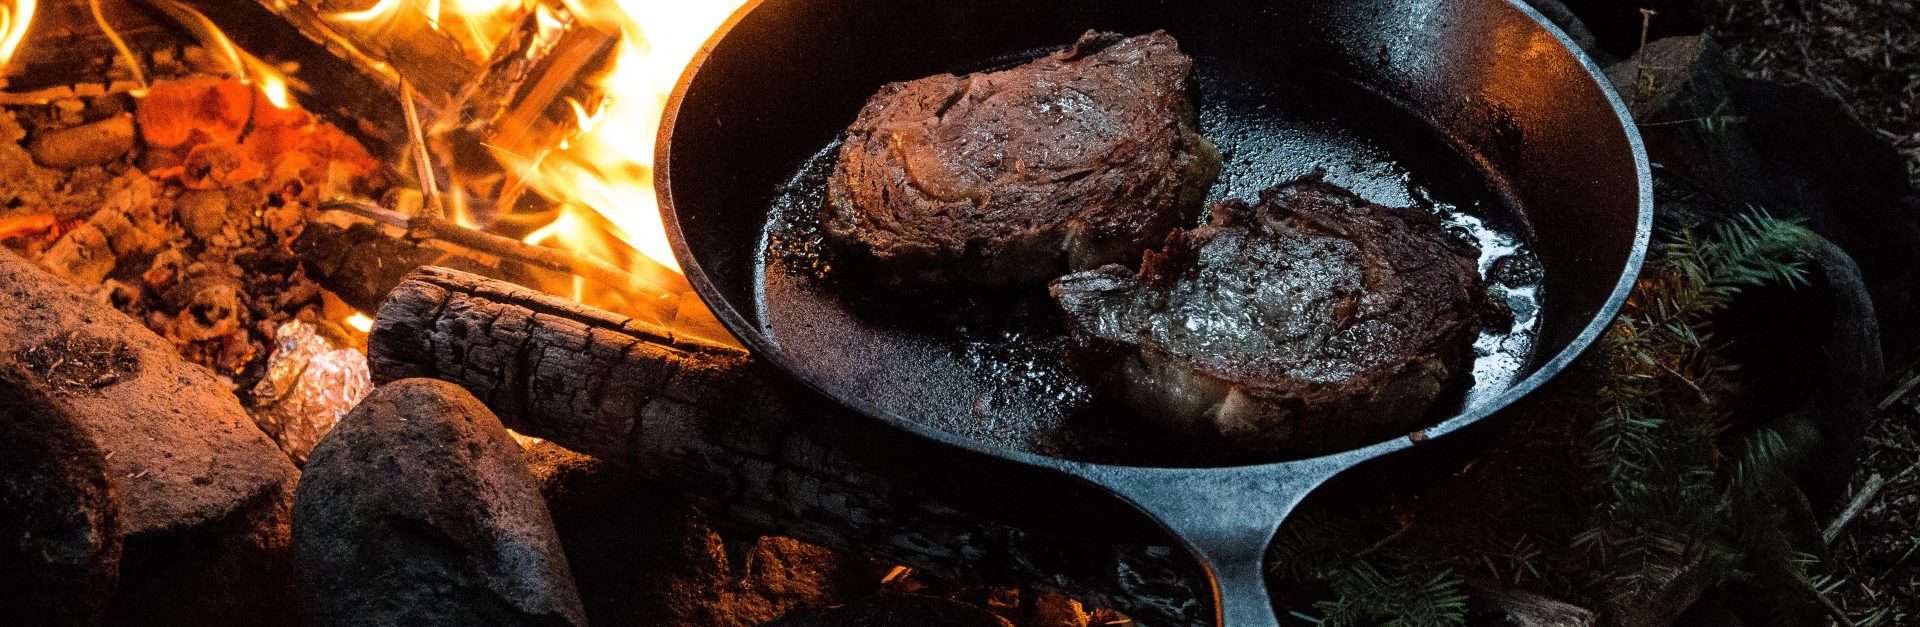 meat cooking in a cast-iron frying pan on a campfire